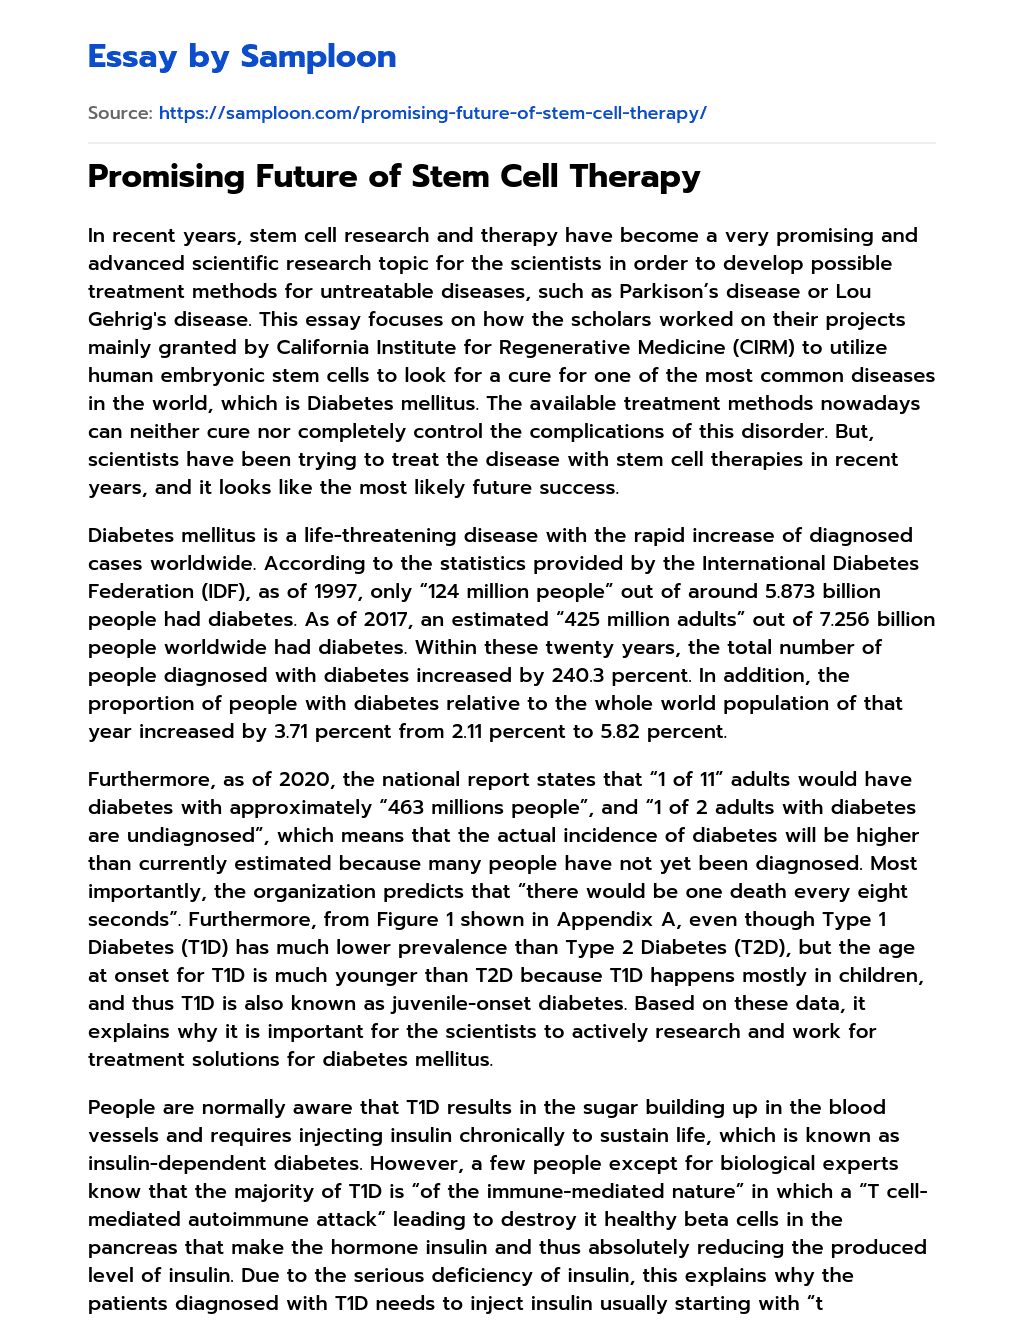 Promising Future of Stem Cell Therapy essay